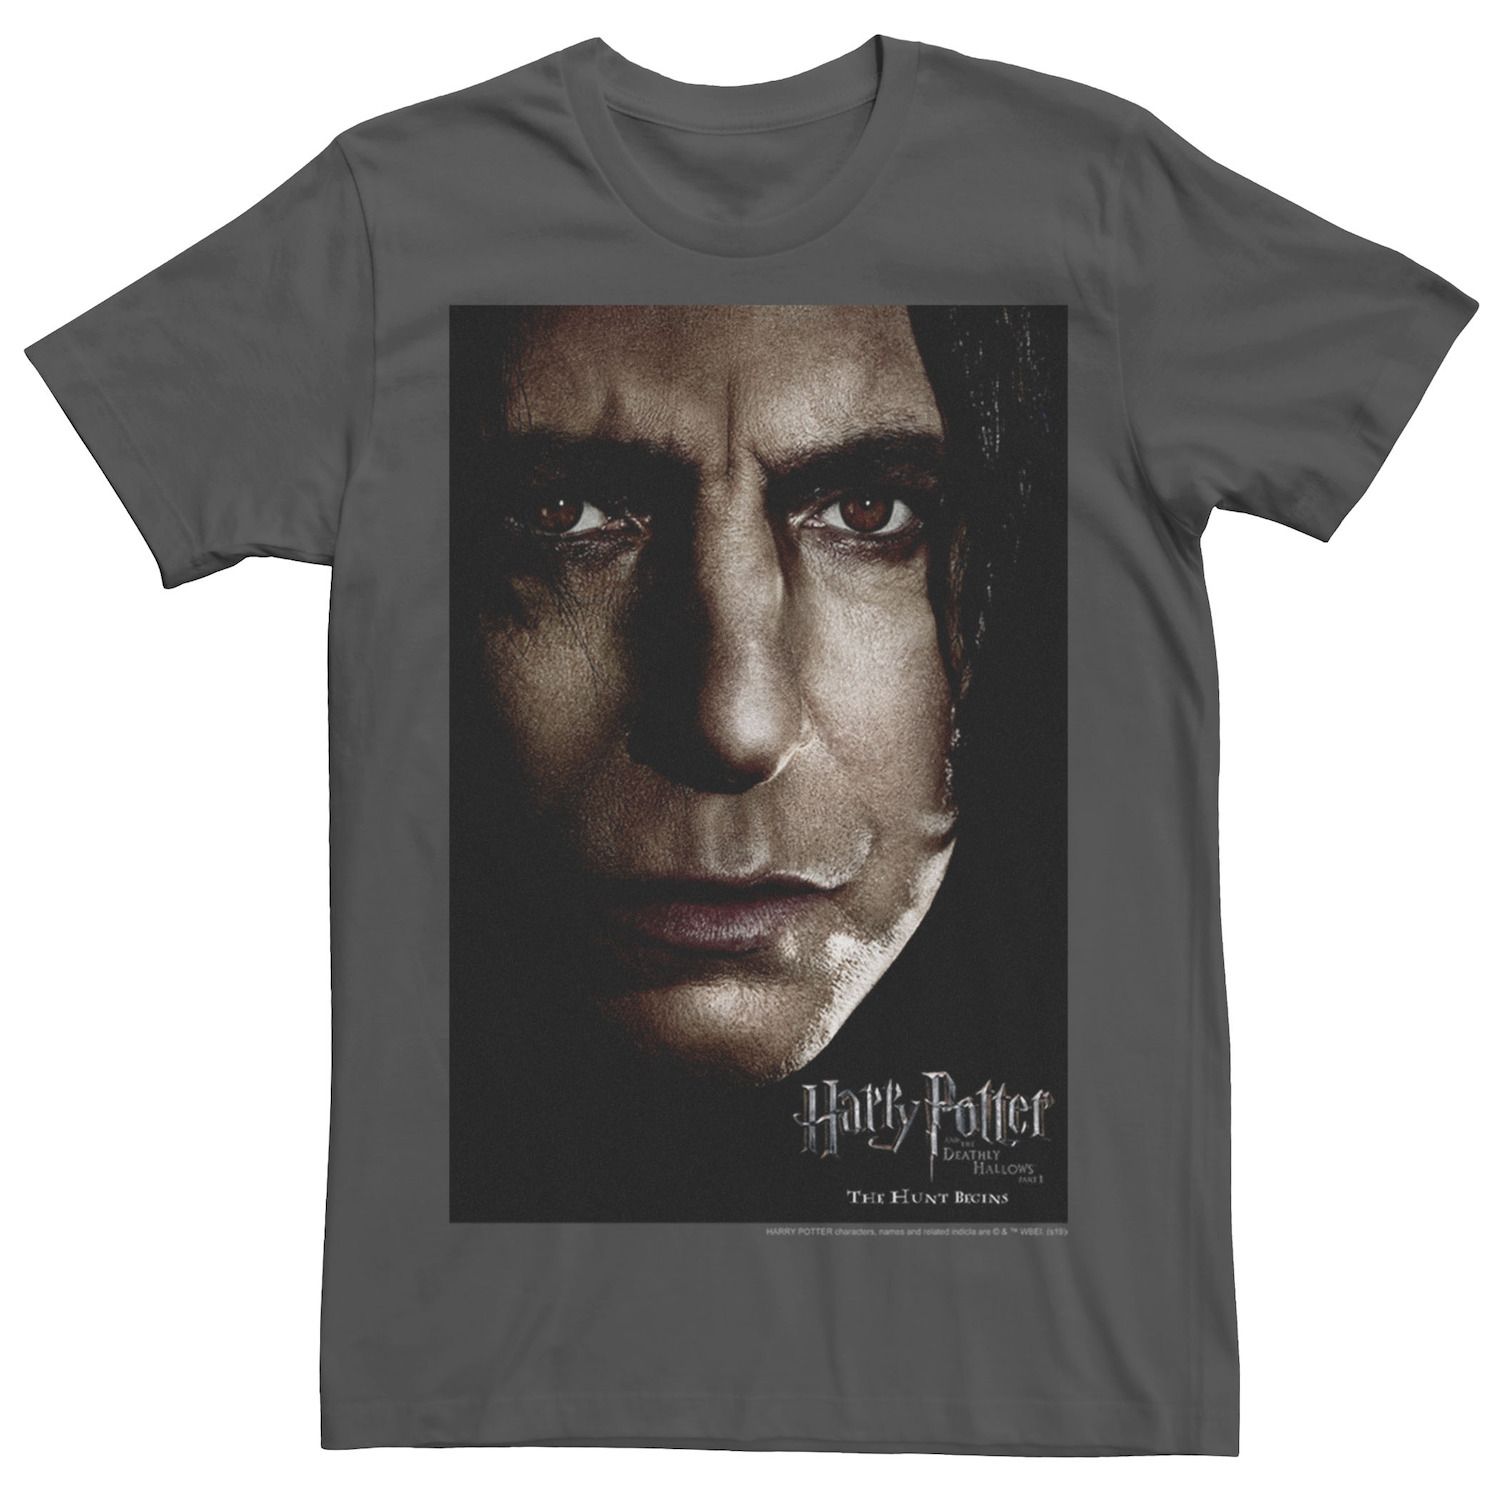 Image for Harry Potter Men's Deathly Hallows Snape Character Poster Graphic Tee at Kohl's.